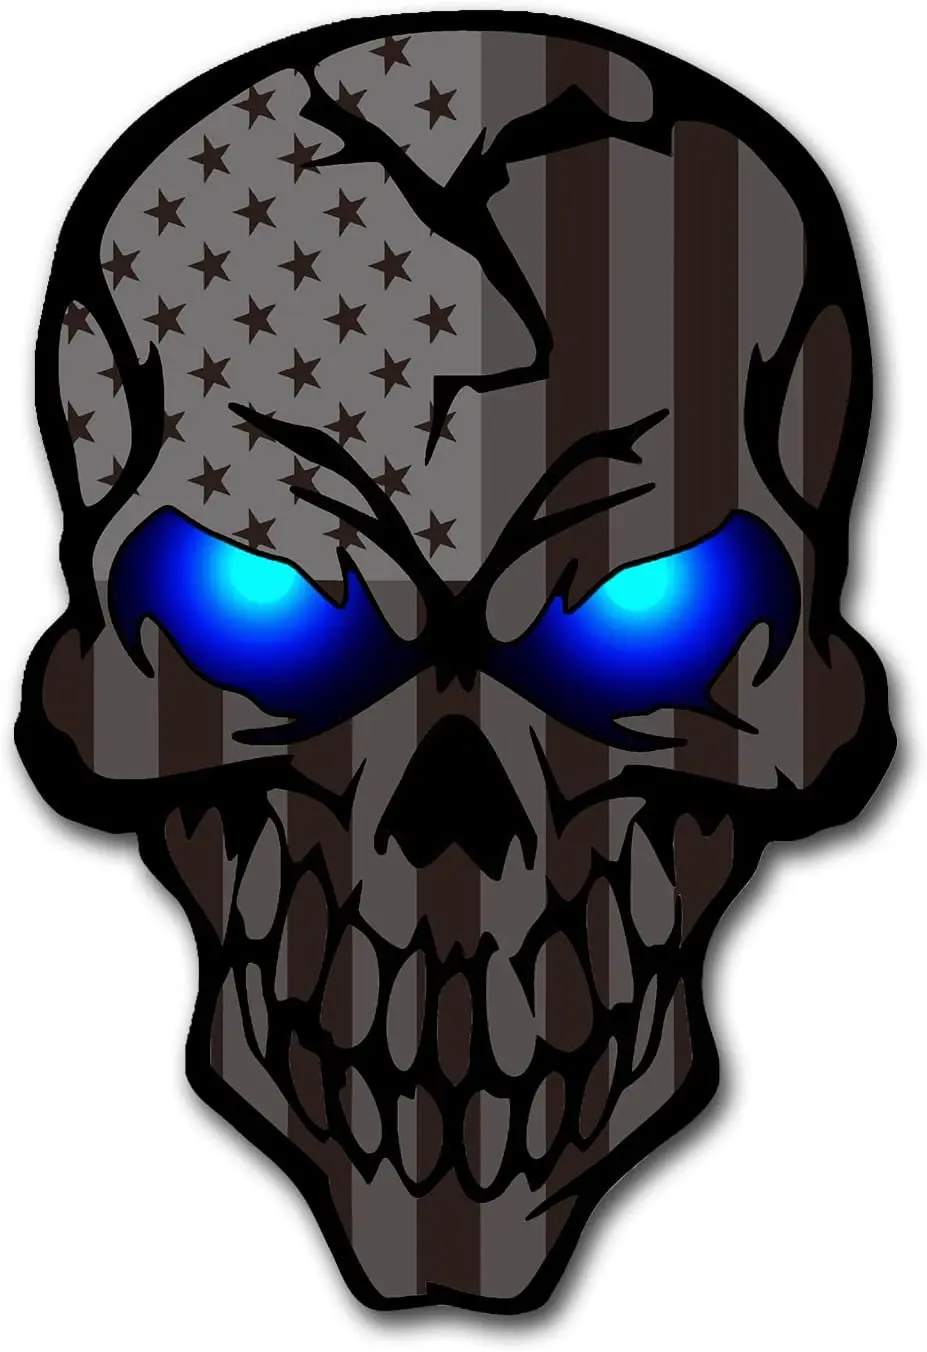 For Skull With Reflective Eyes American Flag Vinyl Decal Stickers